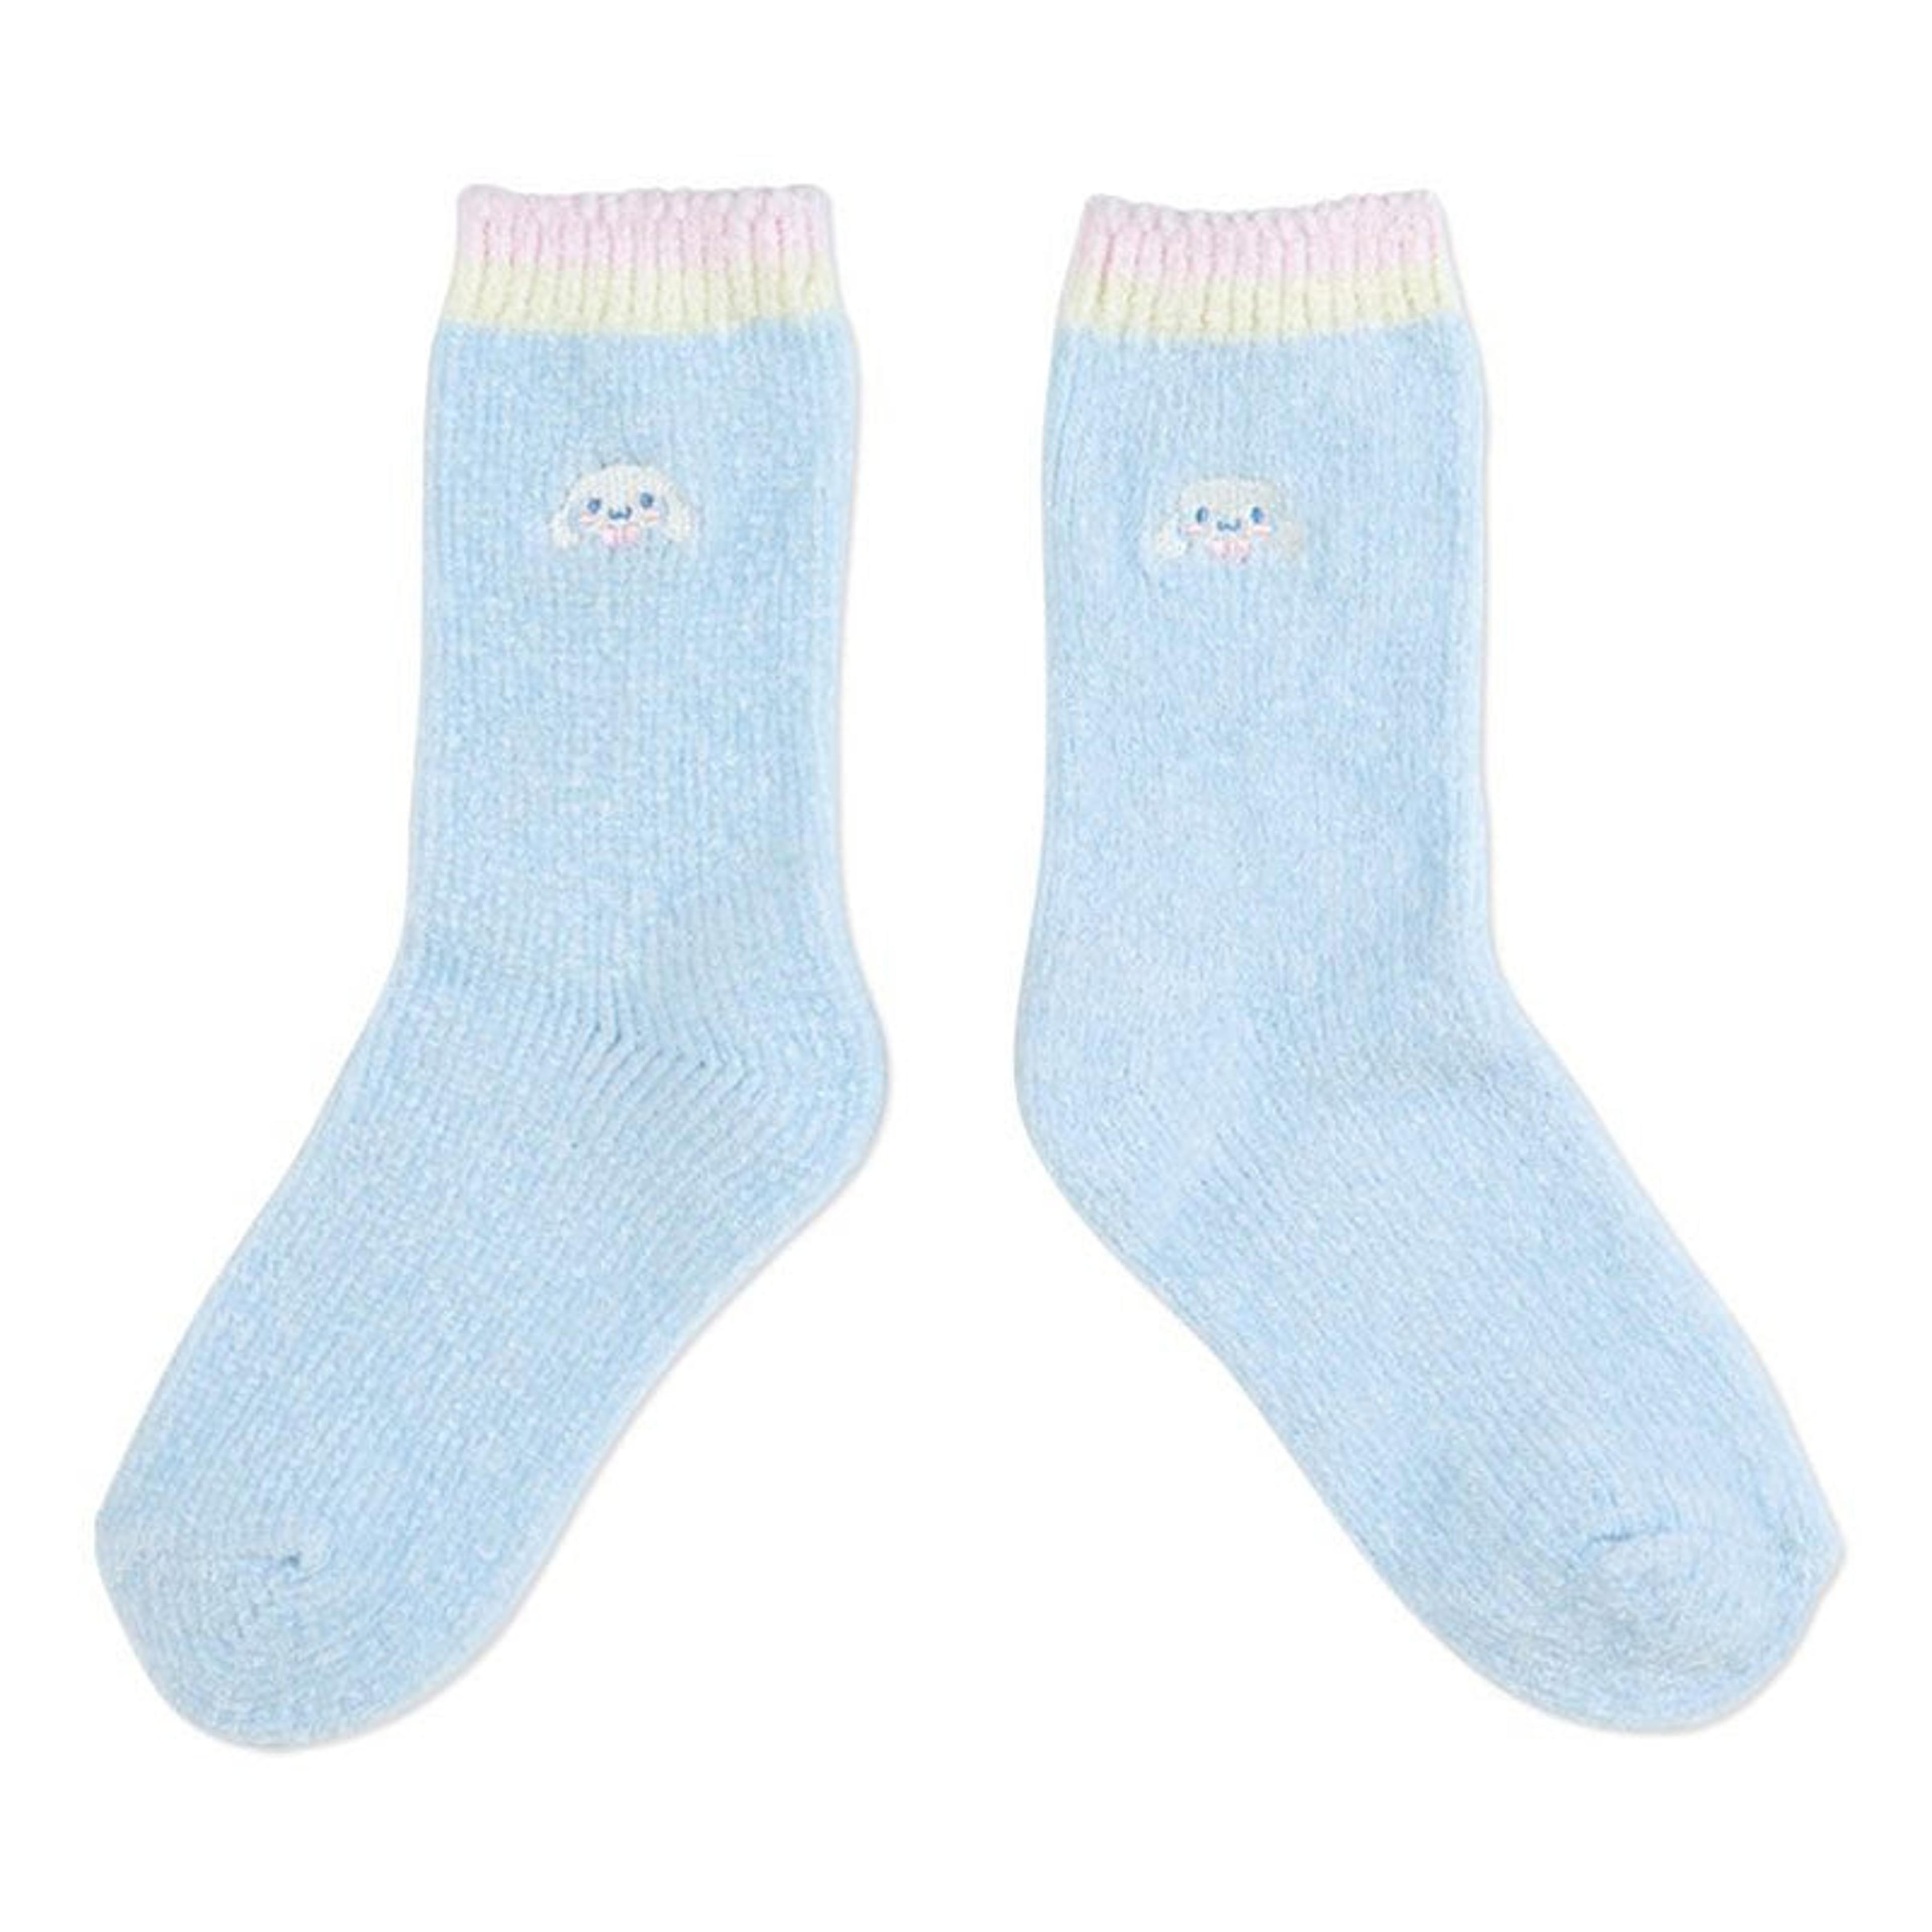 Alternate View 2 of Sanrio Characters Crew Embroidered Face Socks